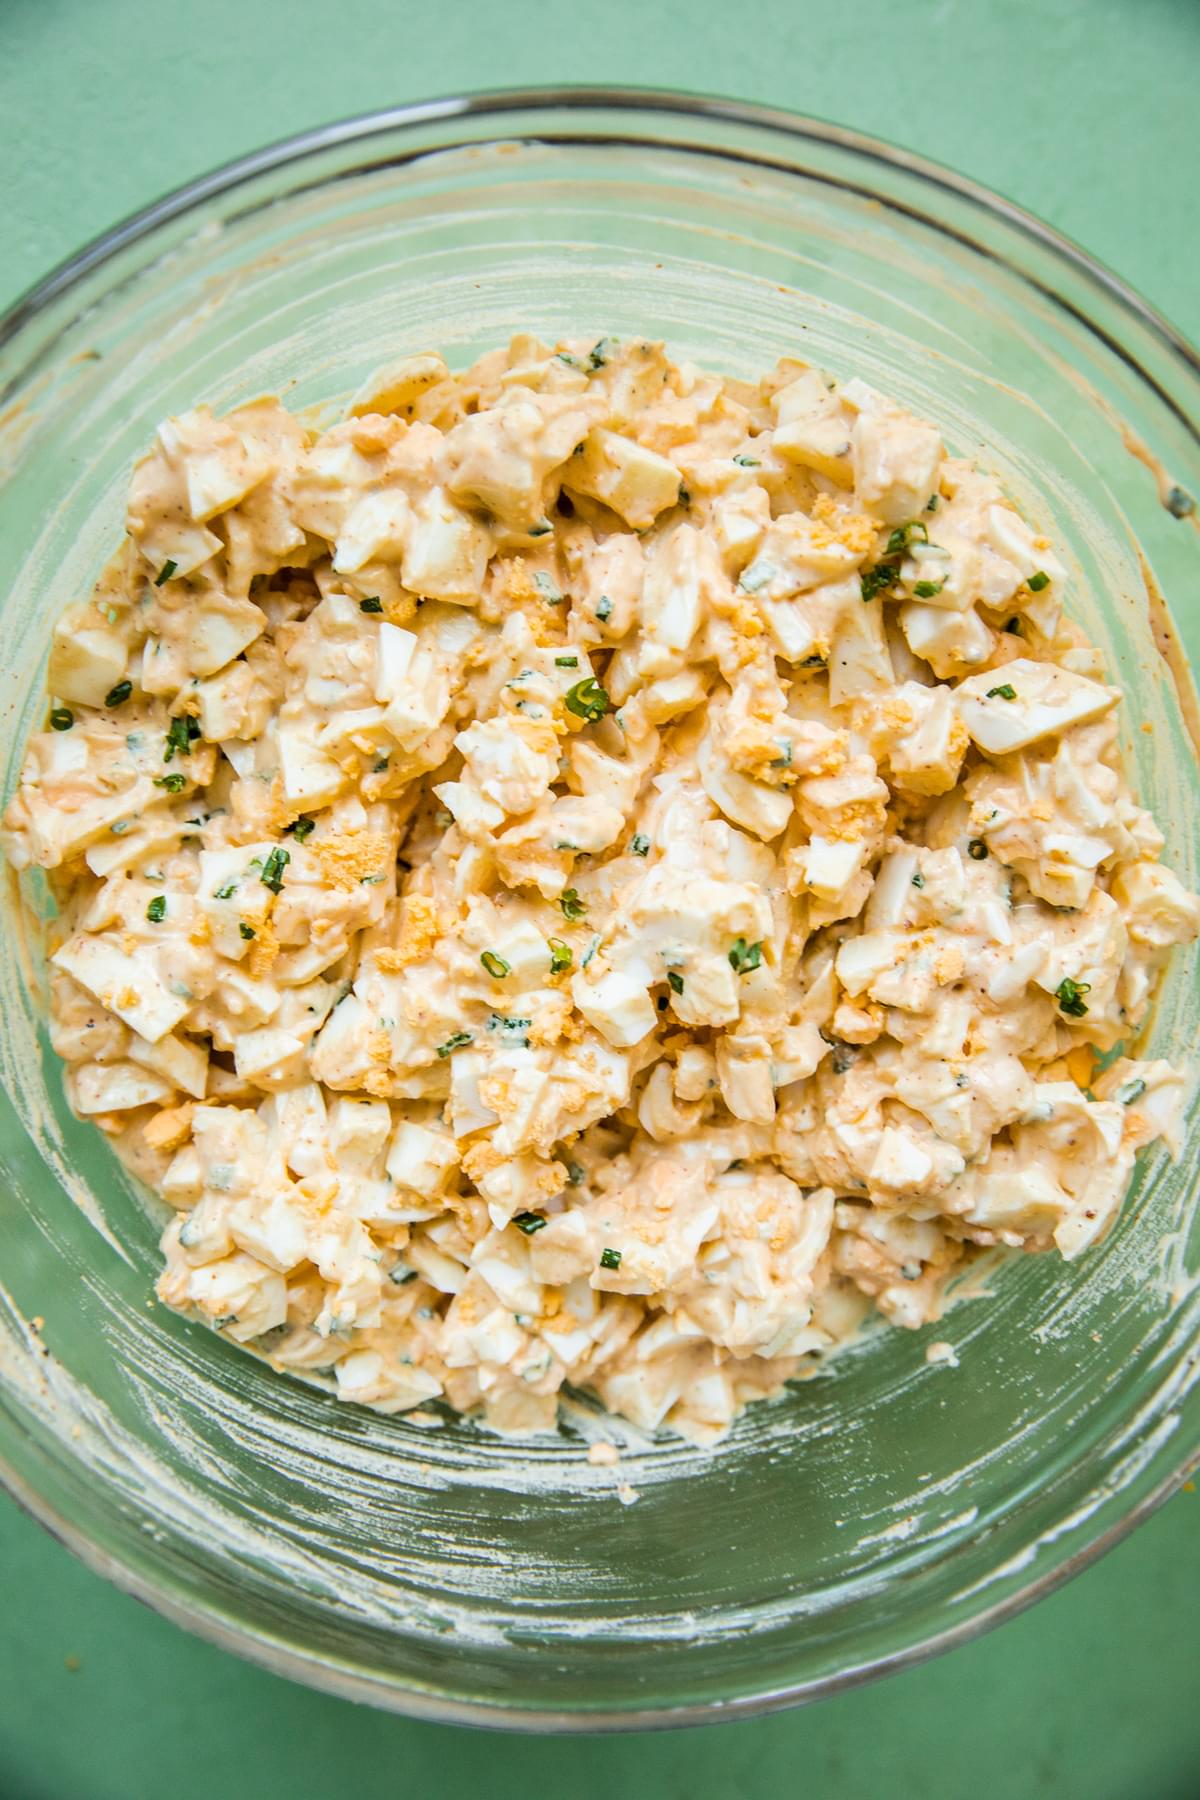 homemade egg salad in a glass bowl made with eggs, mayo, dijon, chives, apple cider vinegar and spices